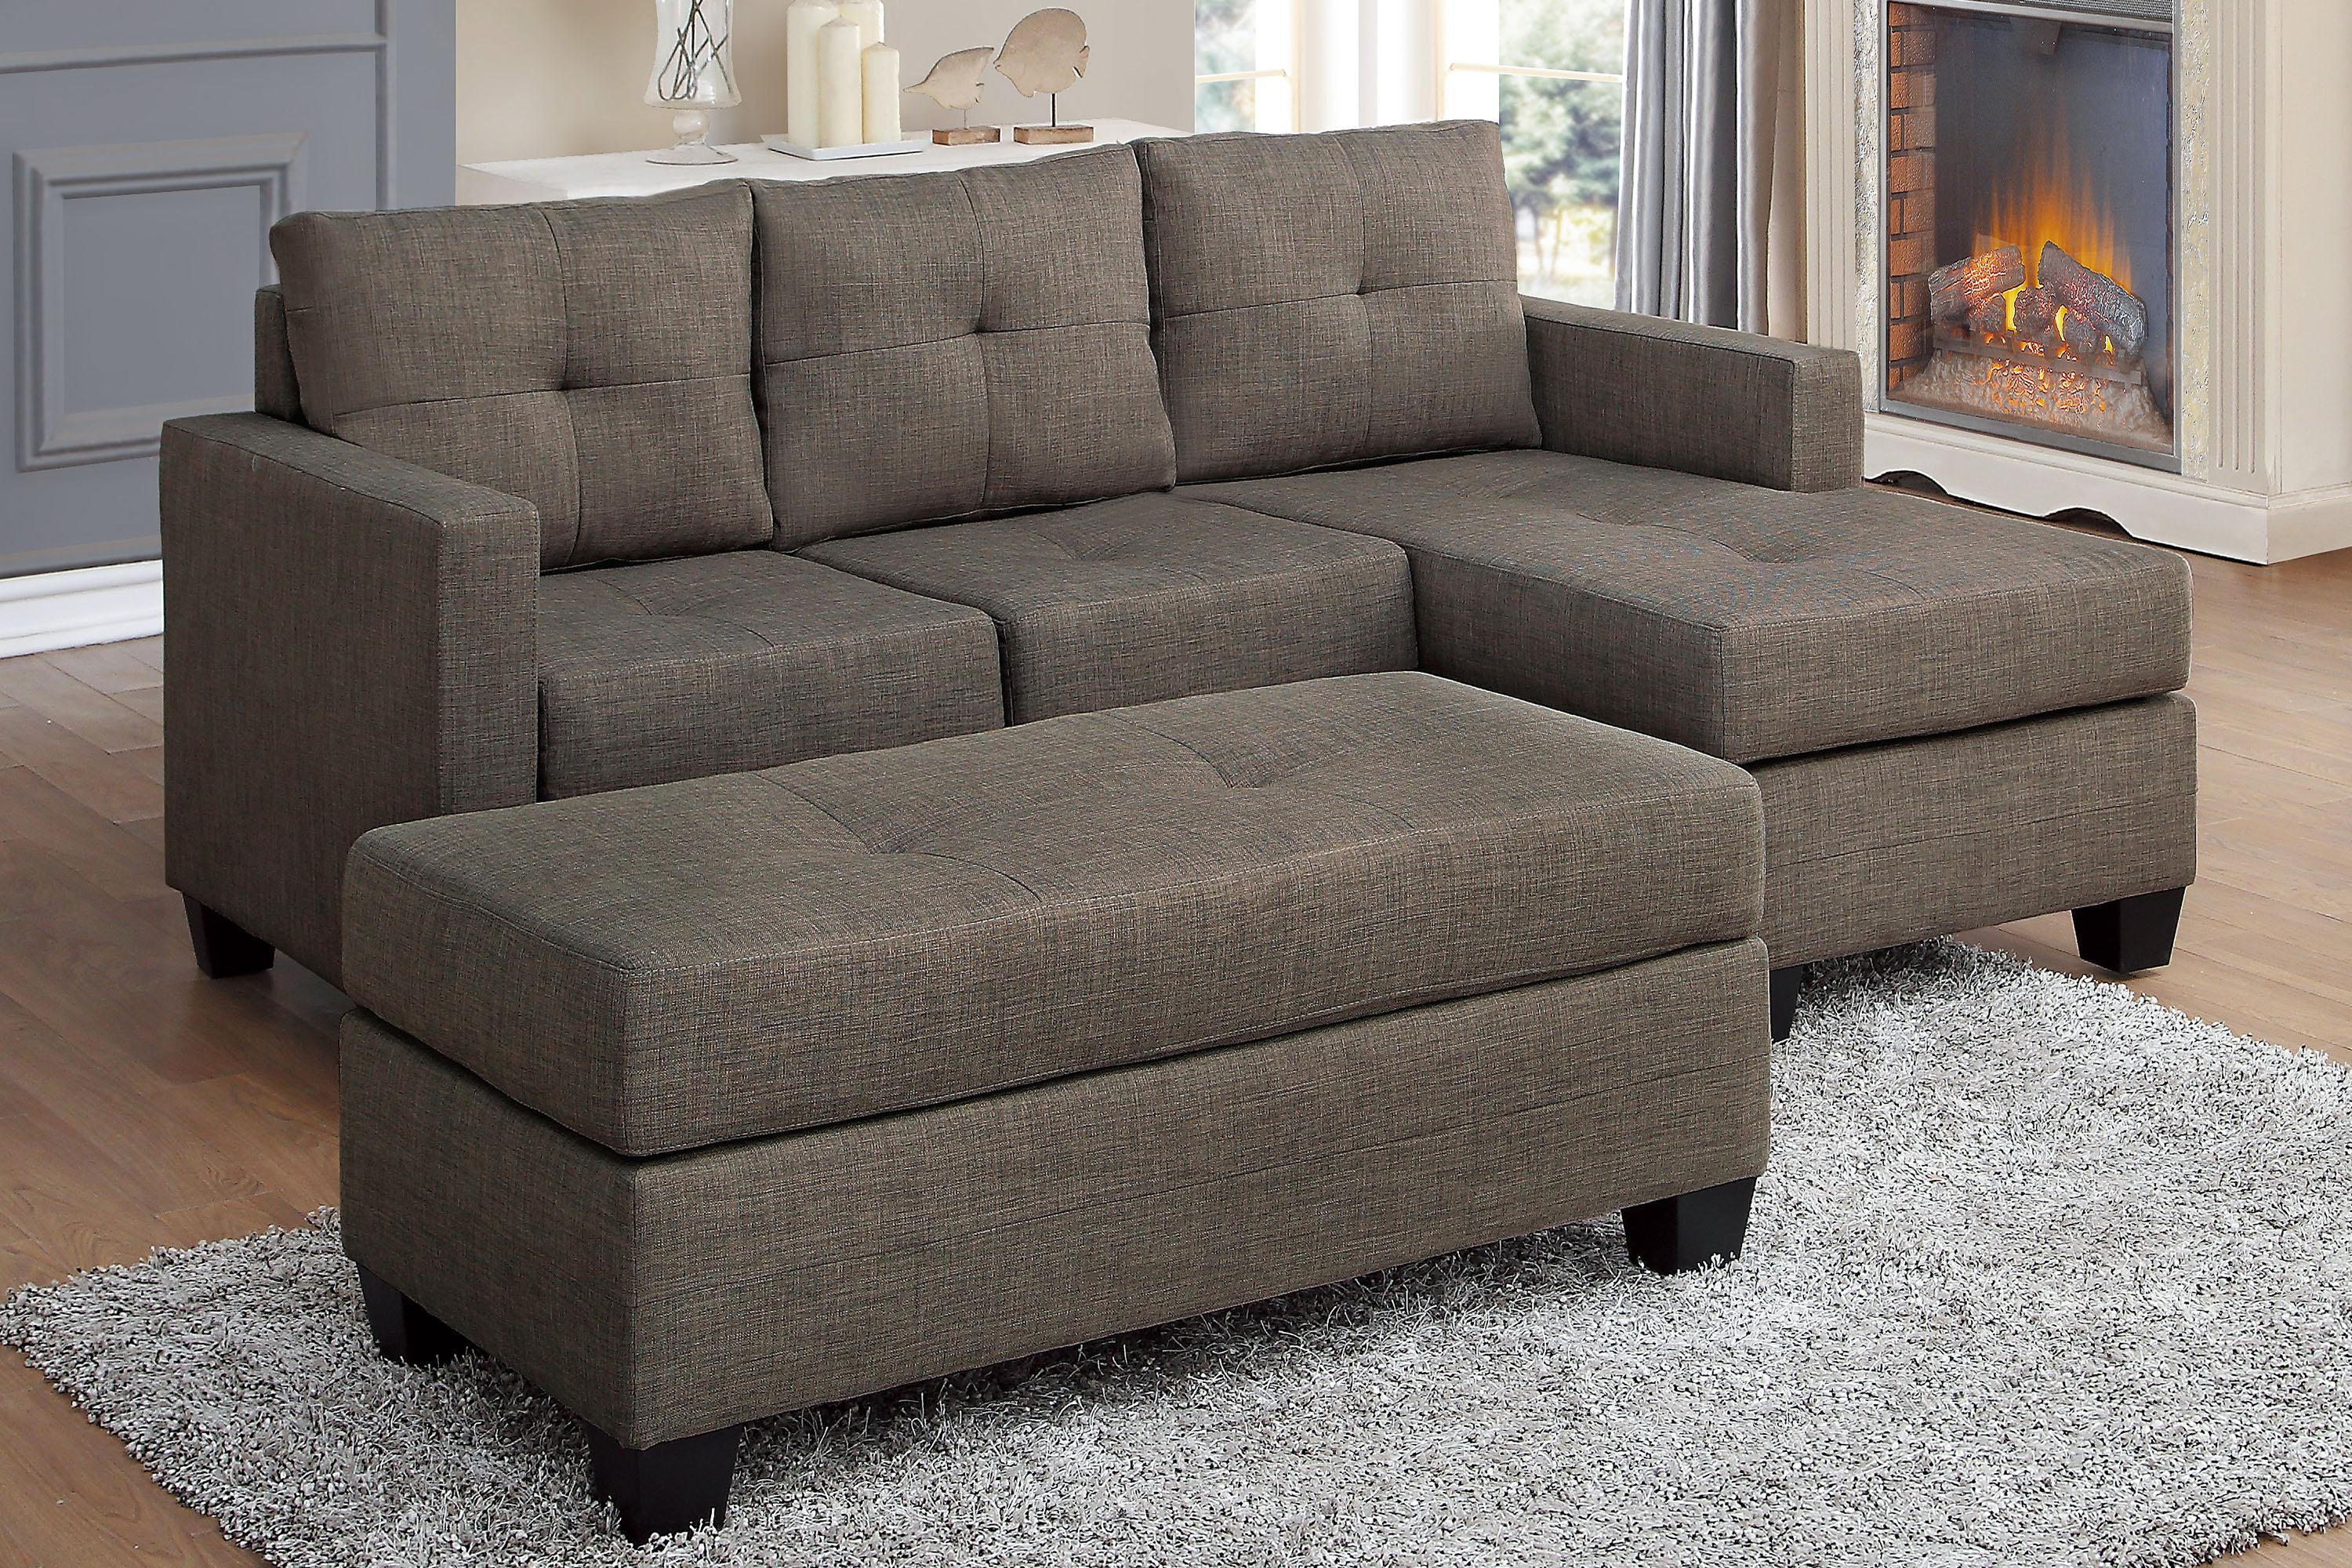 

    
Transitional Brown Textured Resersible Sofa w/Ottoman Homelegance 9789BRG*2OT Phelps
